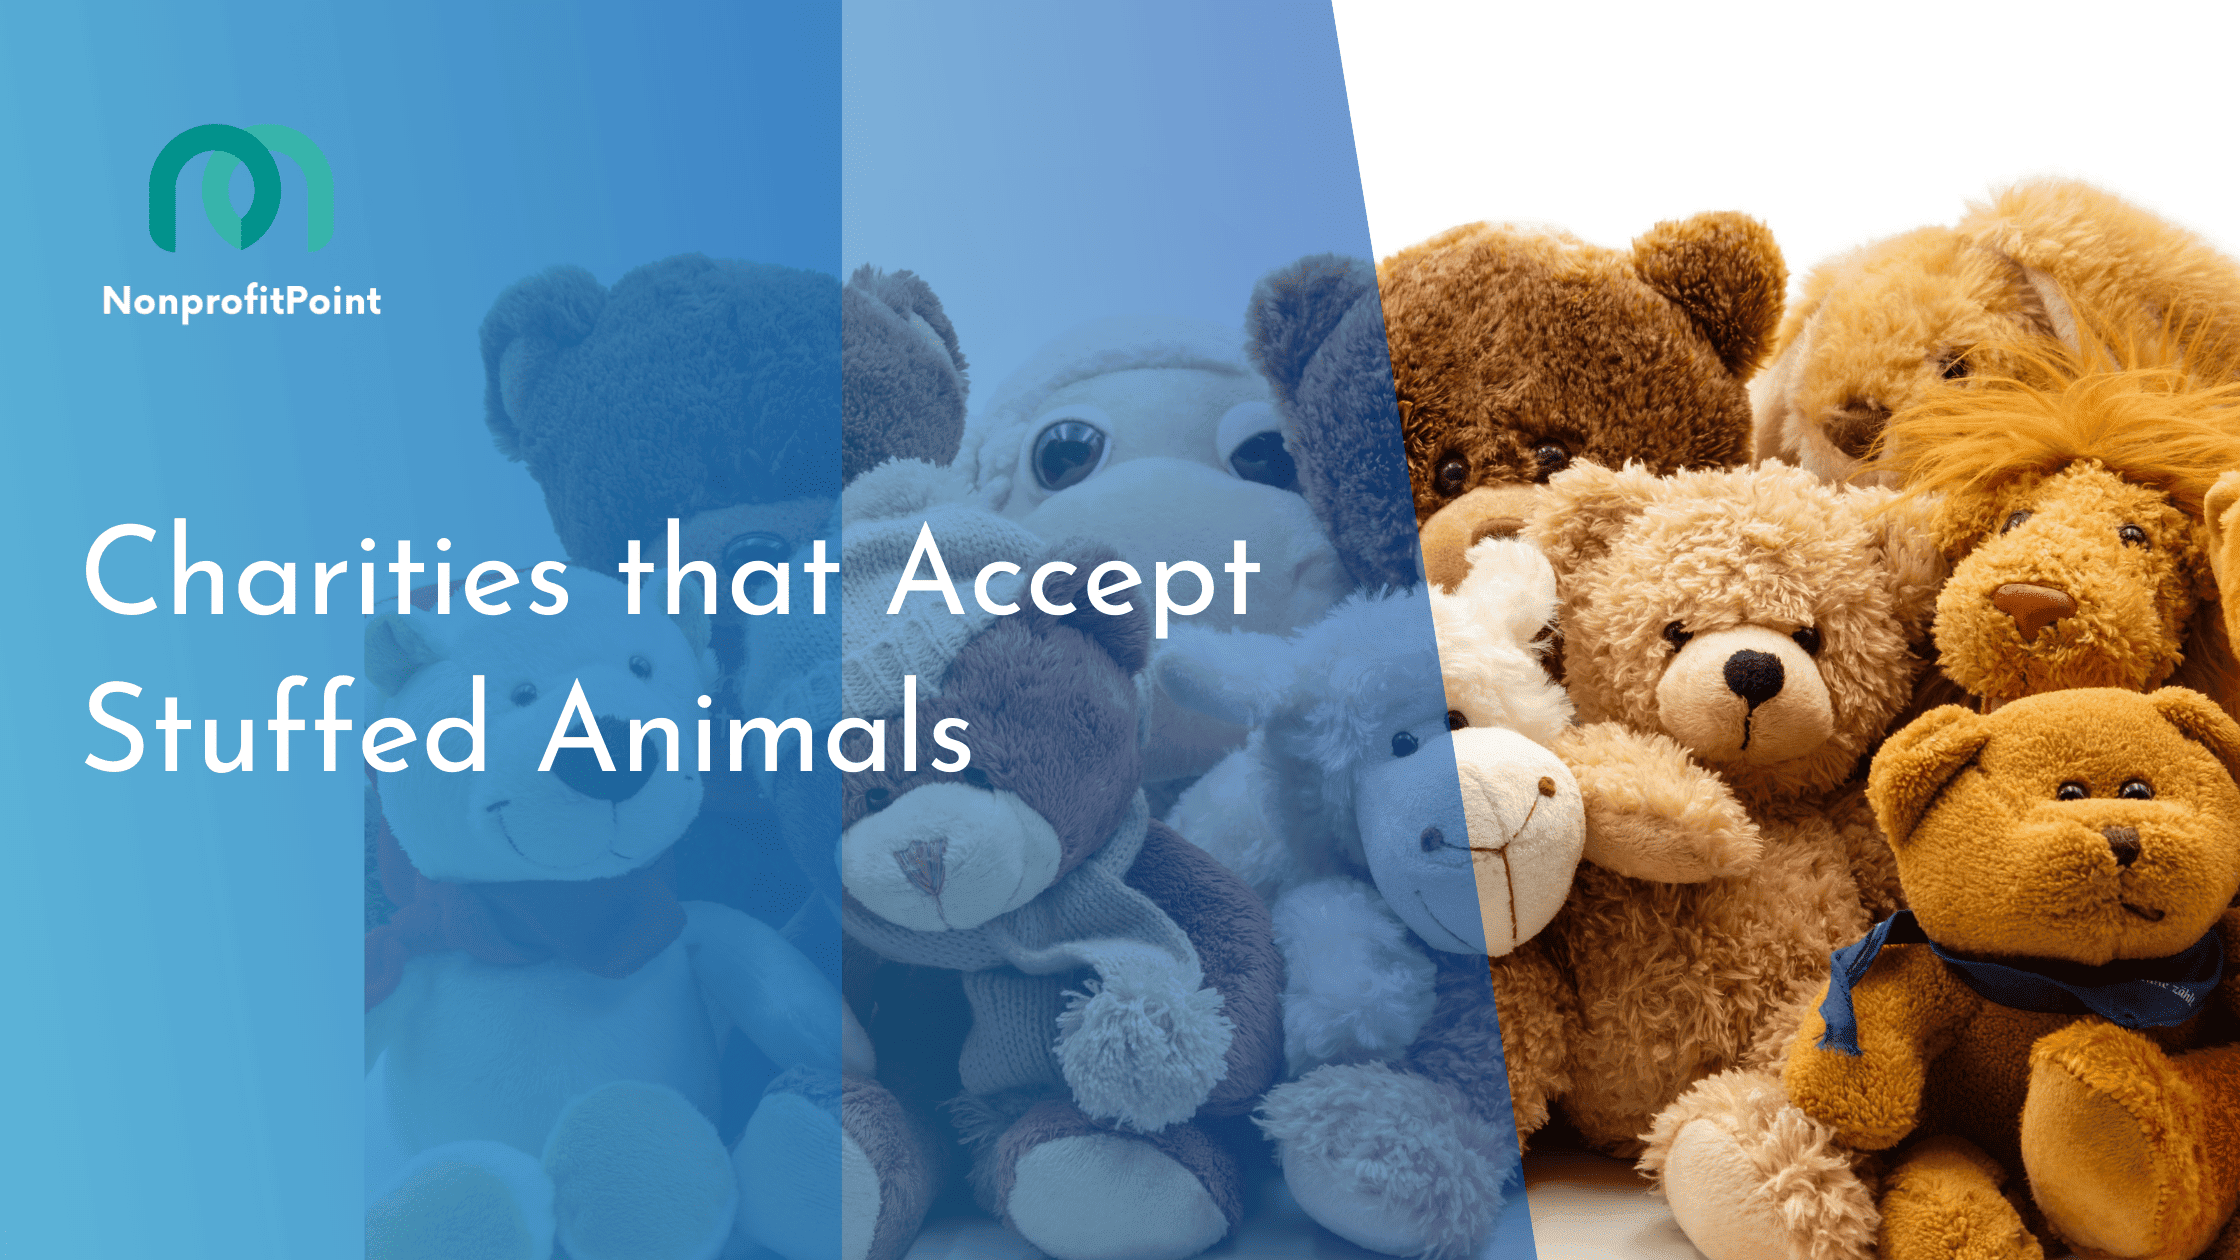 Charities that Accept Stuffed Animals